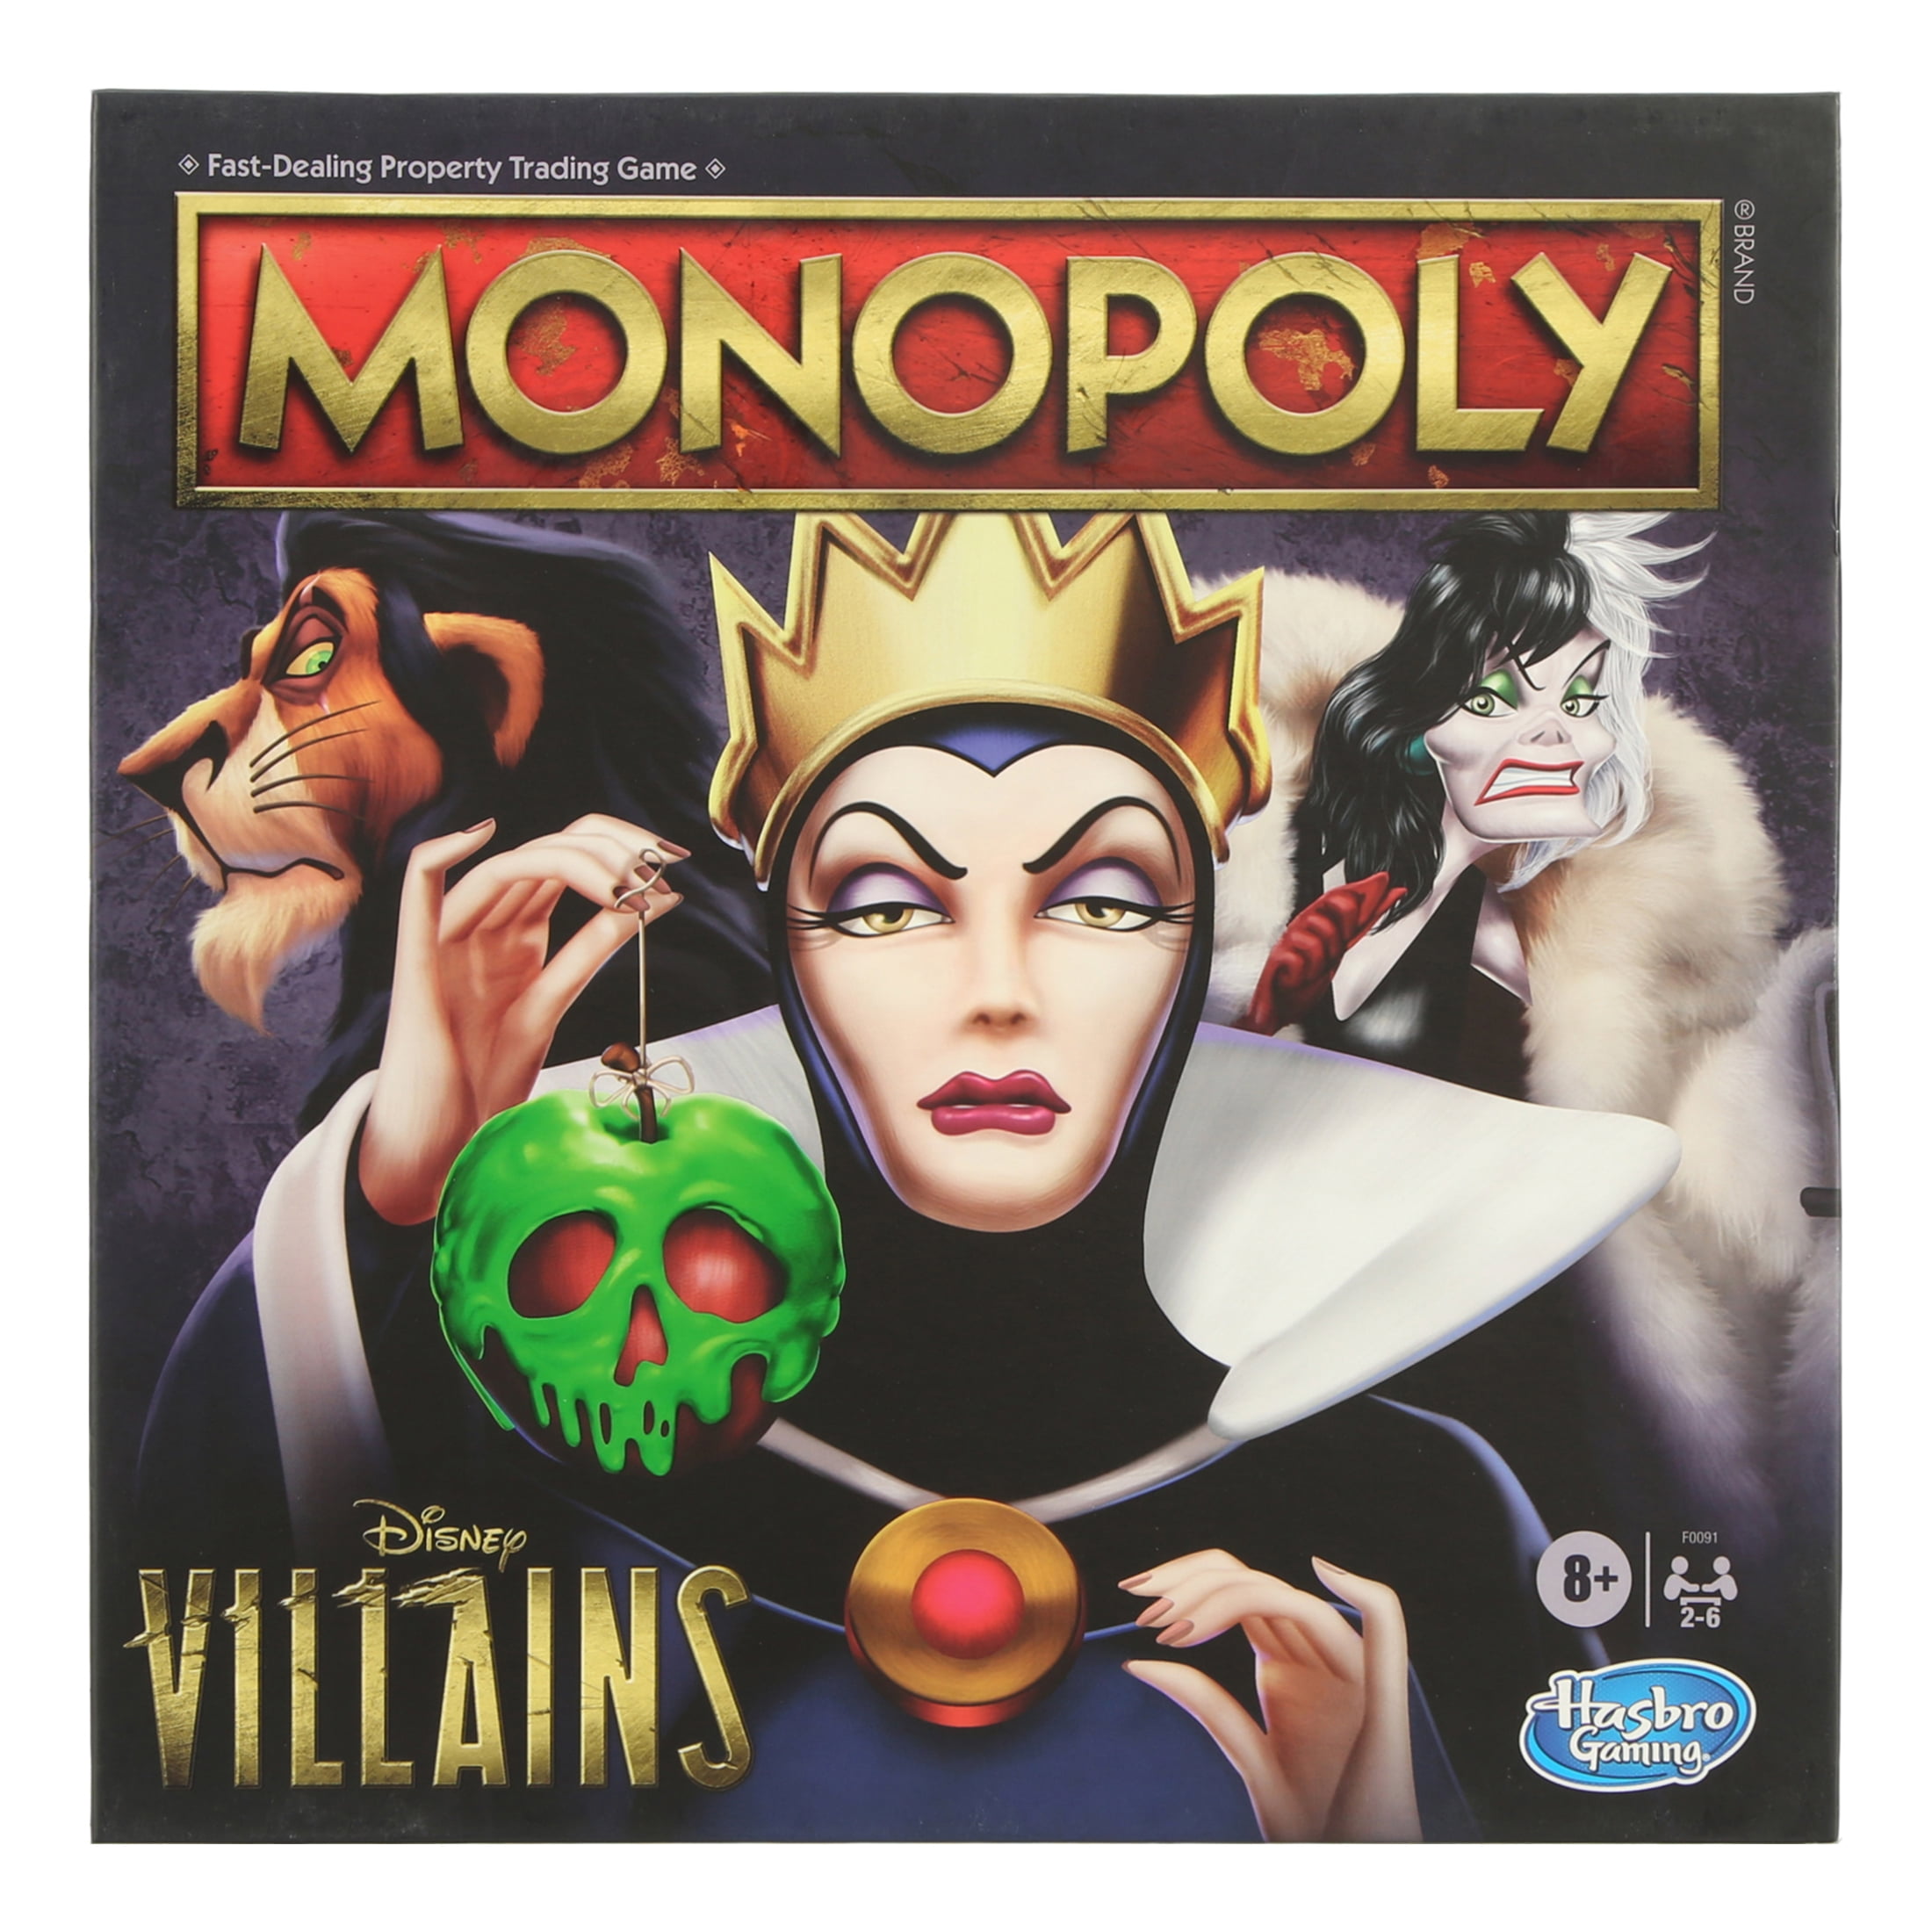 Monopoly Disney Princess Edition Board Game 3d Hasbro Gaming for sale online 